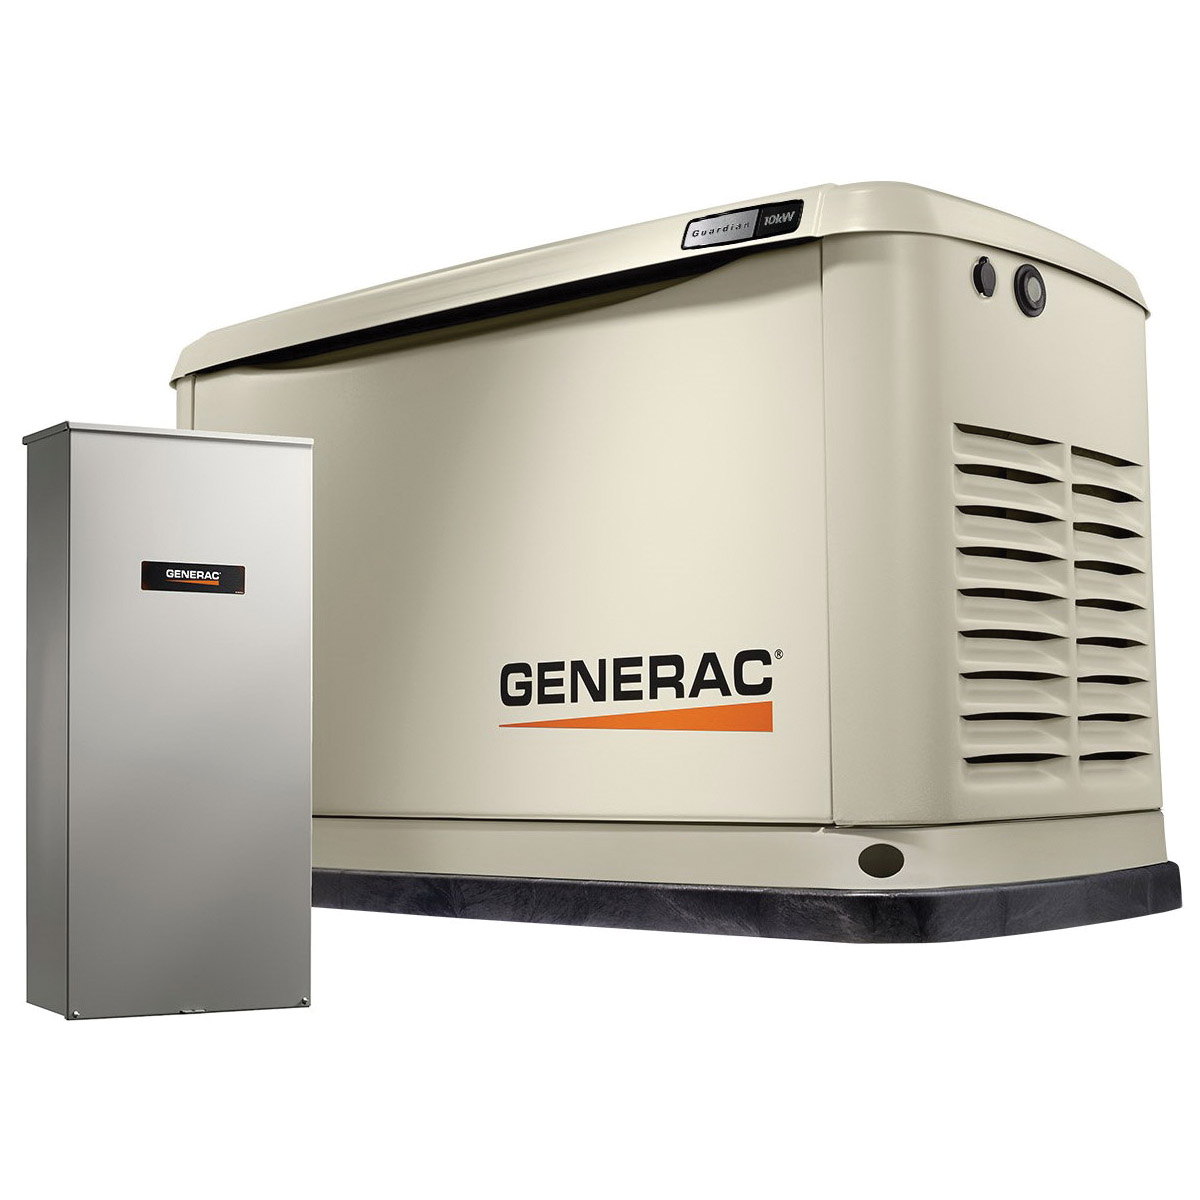 Generac Guardian Series 7172 Air-Cooled Standby Generator, 41.7/37.5 A, 120/240 V, 9 to 10 kW Output, Automatic Start